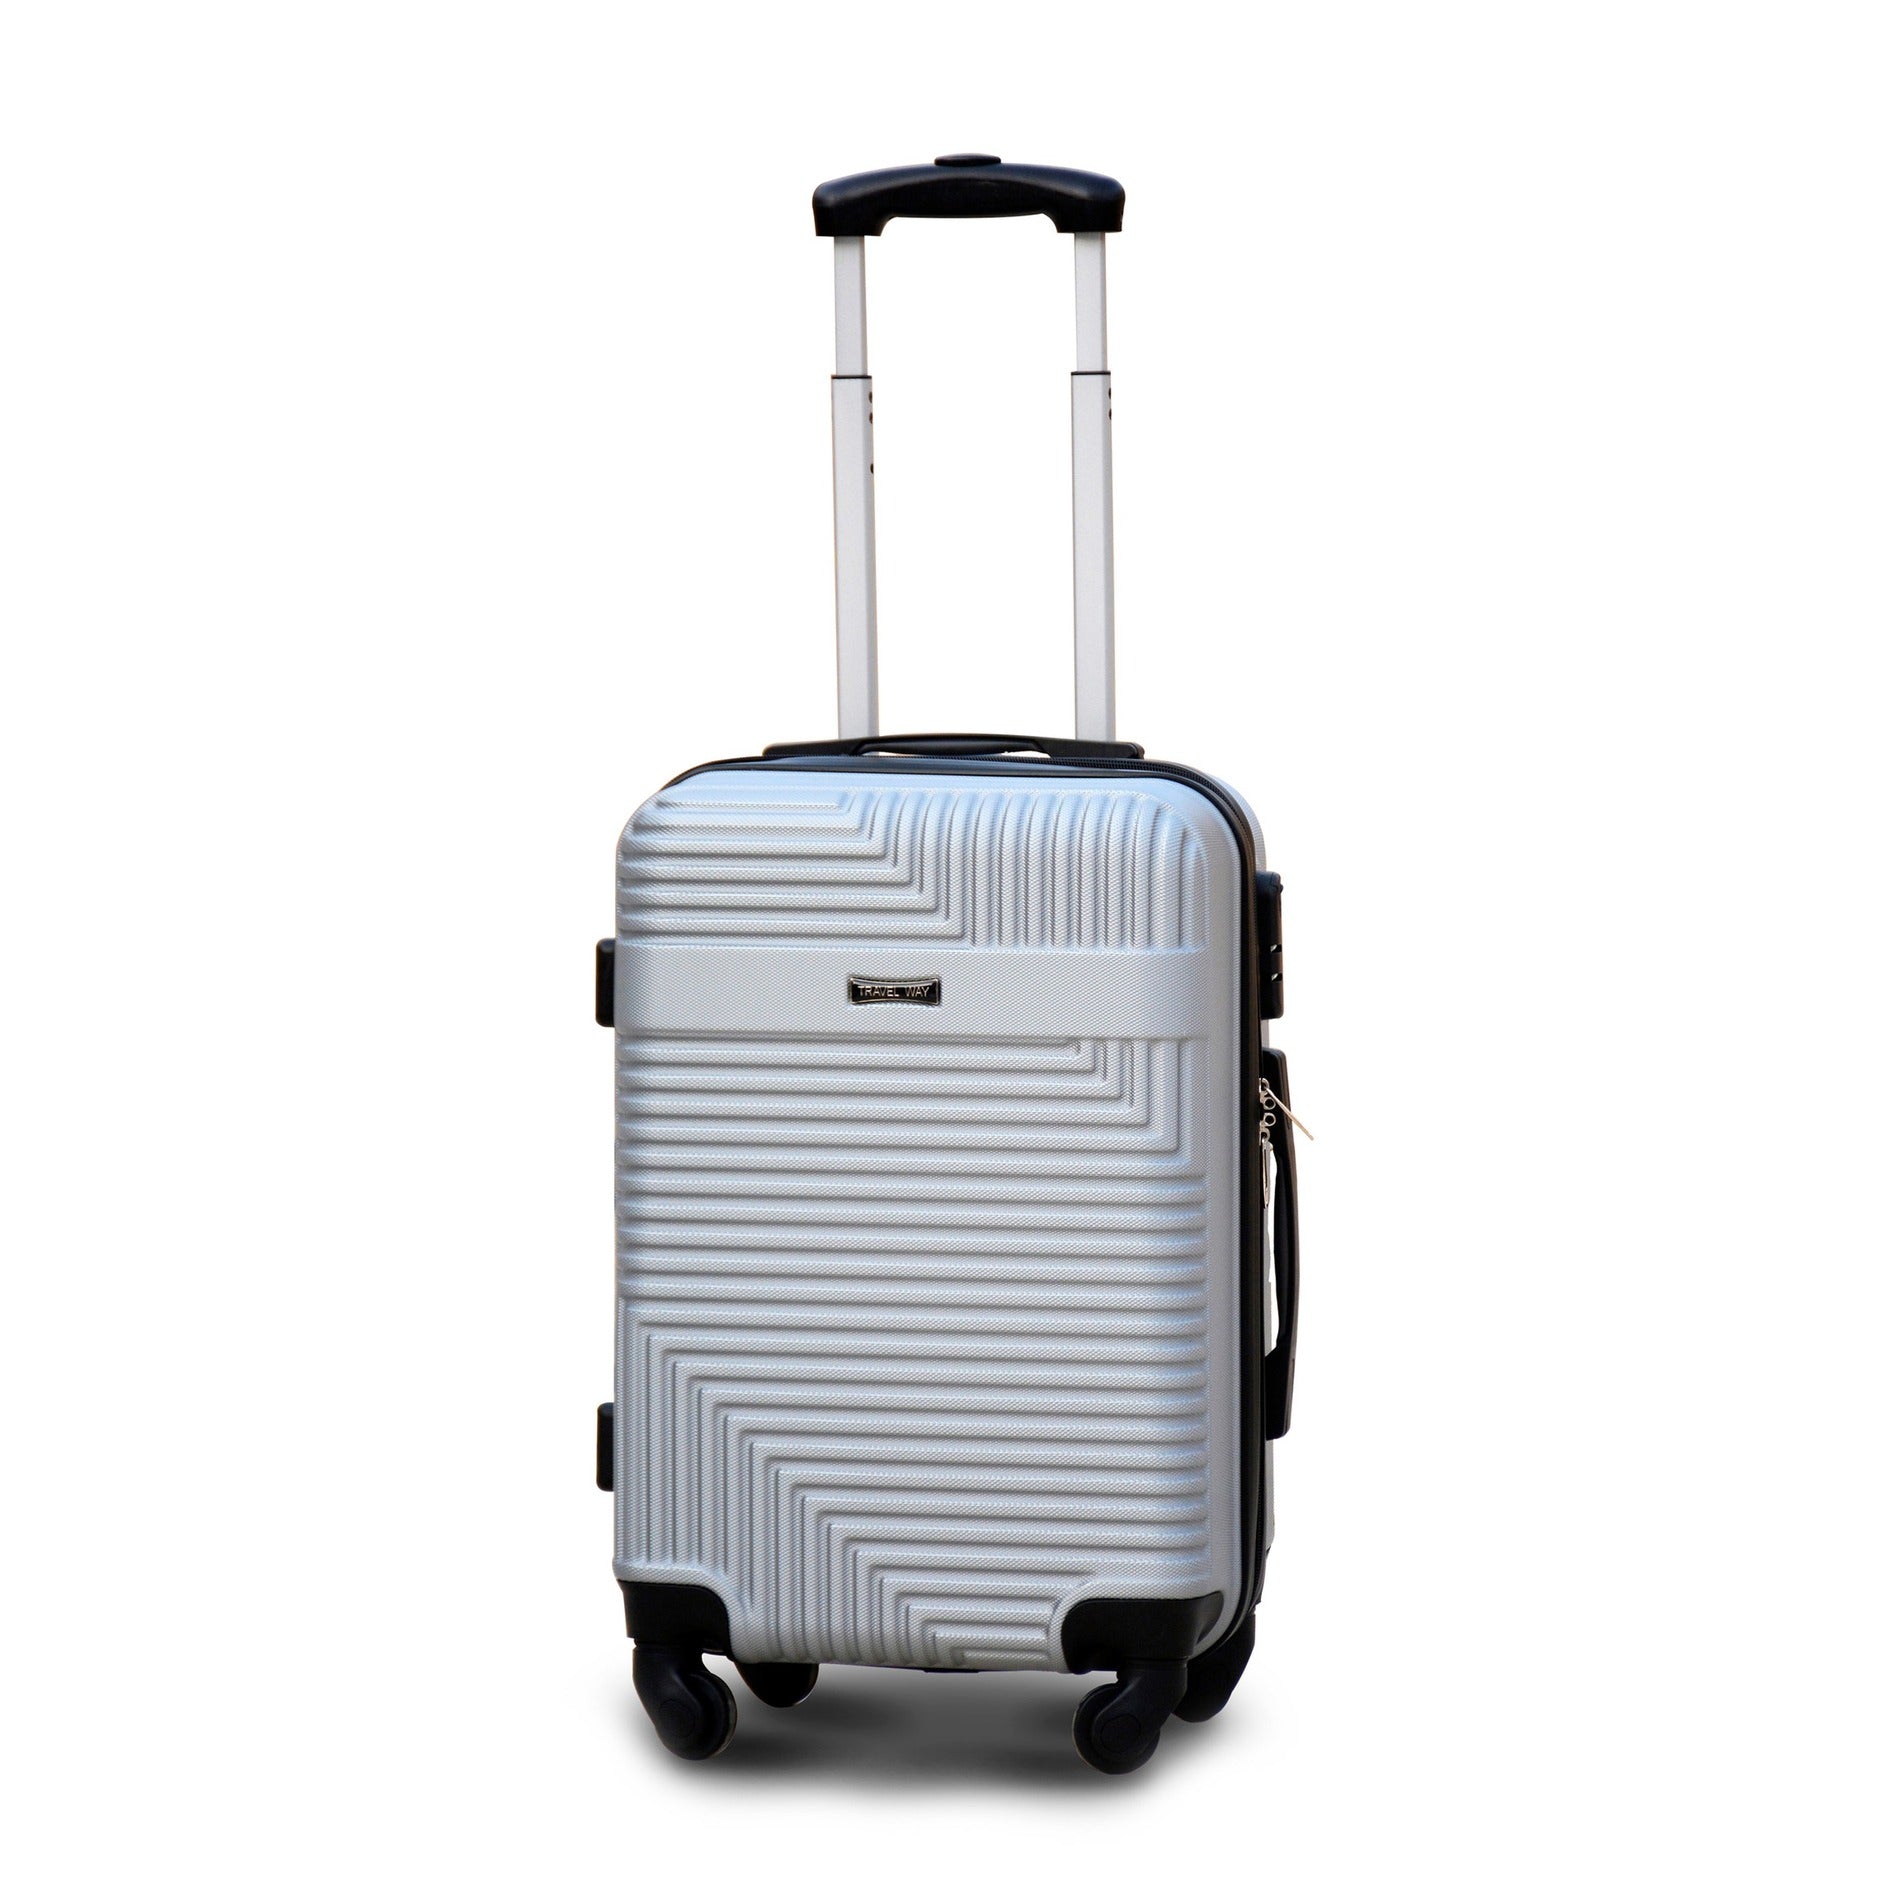 3 Piece Set 20" 24" 28 Inches Silver Colour Travel Way ABS lightweight Luggage Hard Case Trolley Bag | 2 Year Warranty